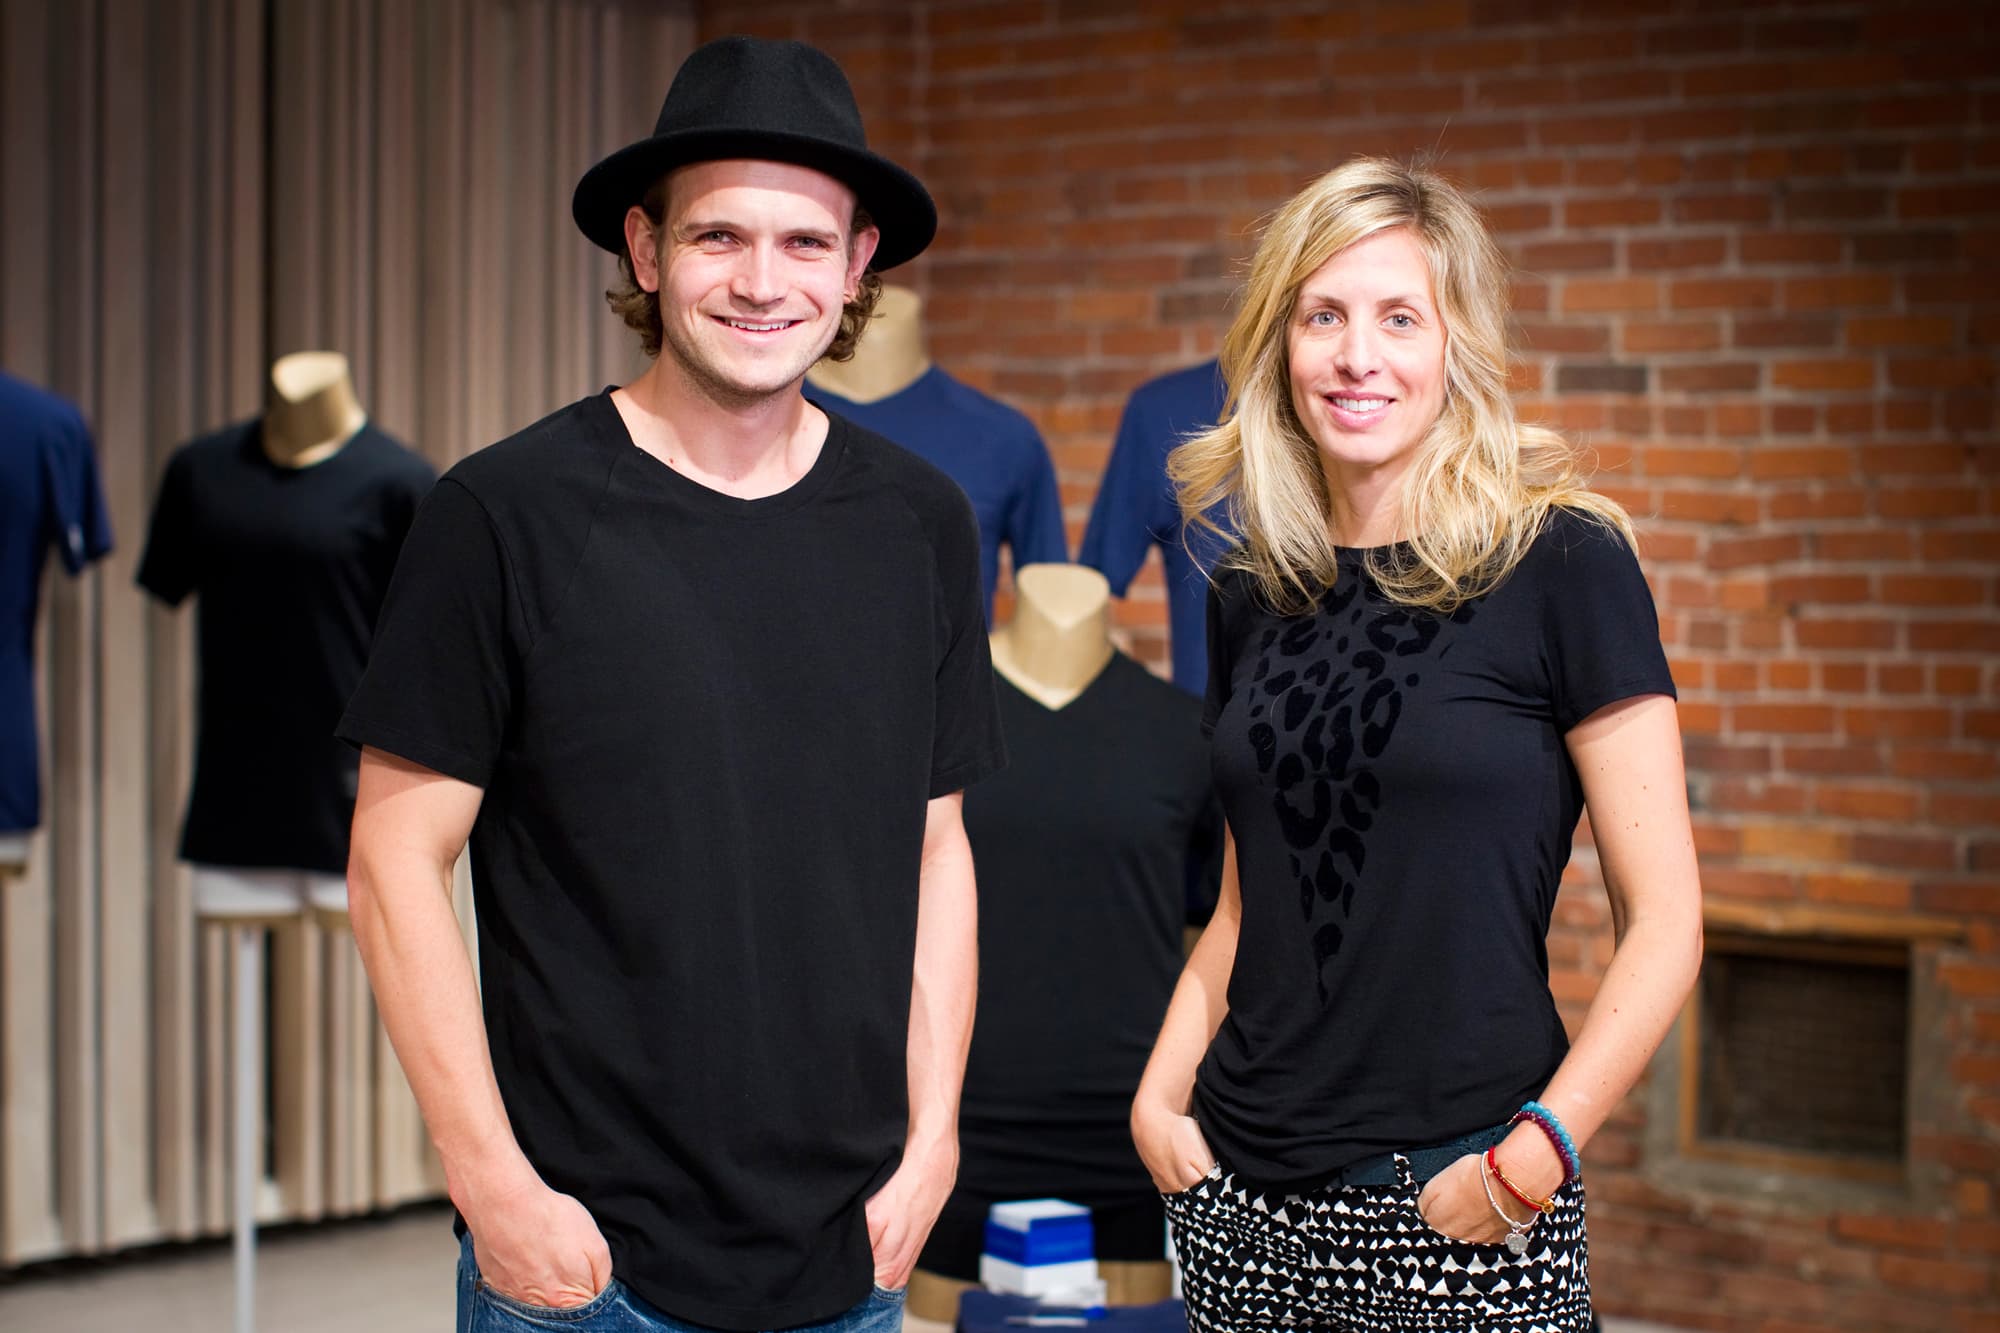 Lululemon founder's wife and son launch new brand